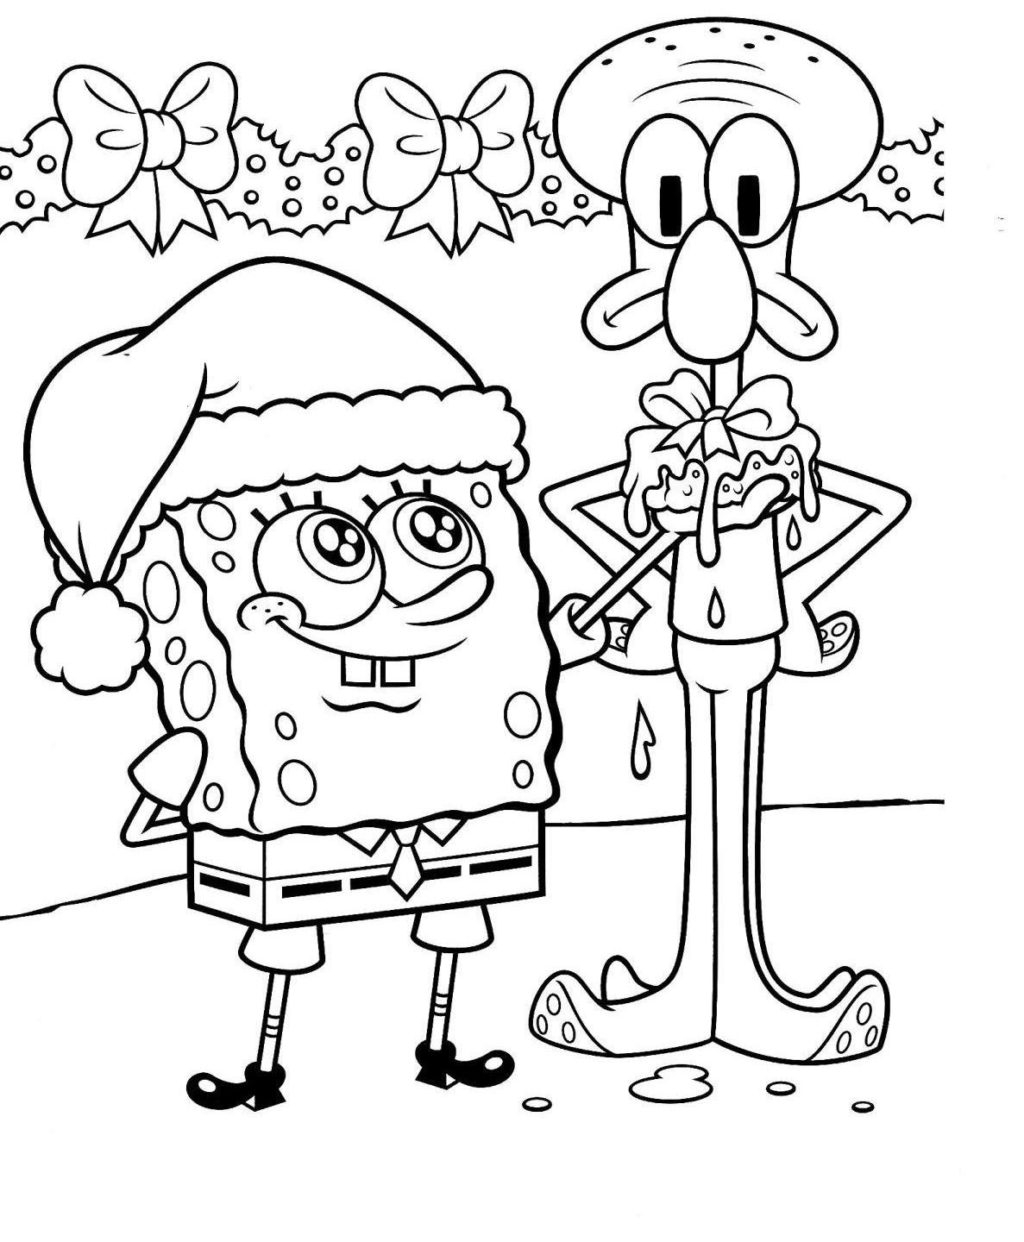 Children's Christmas Coloring Pages Free Coloring Book World Spongebob Christmas Coloring Pages Free